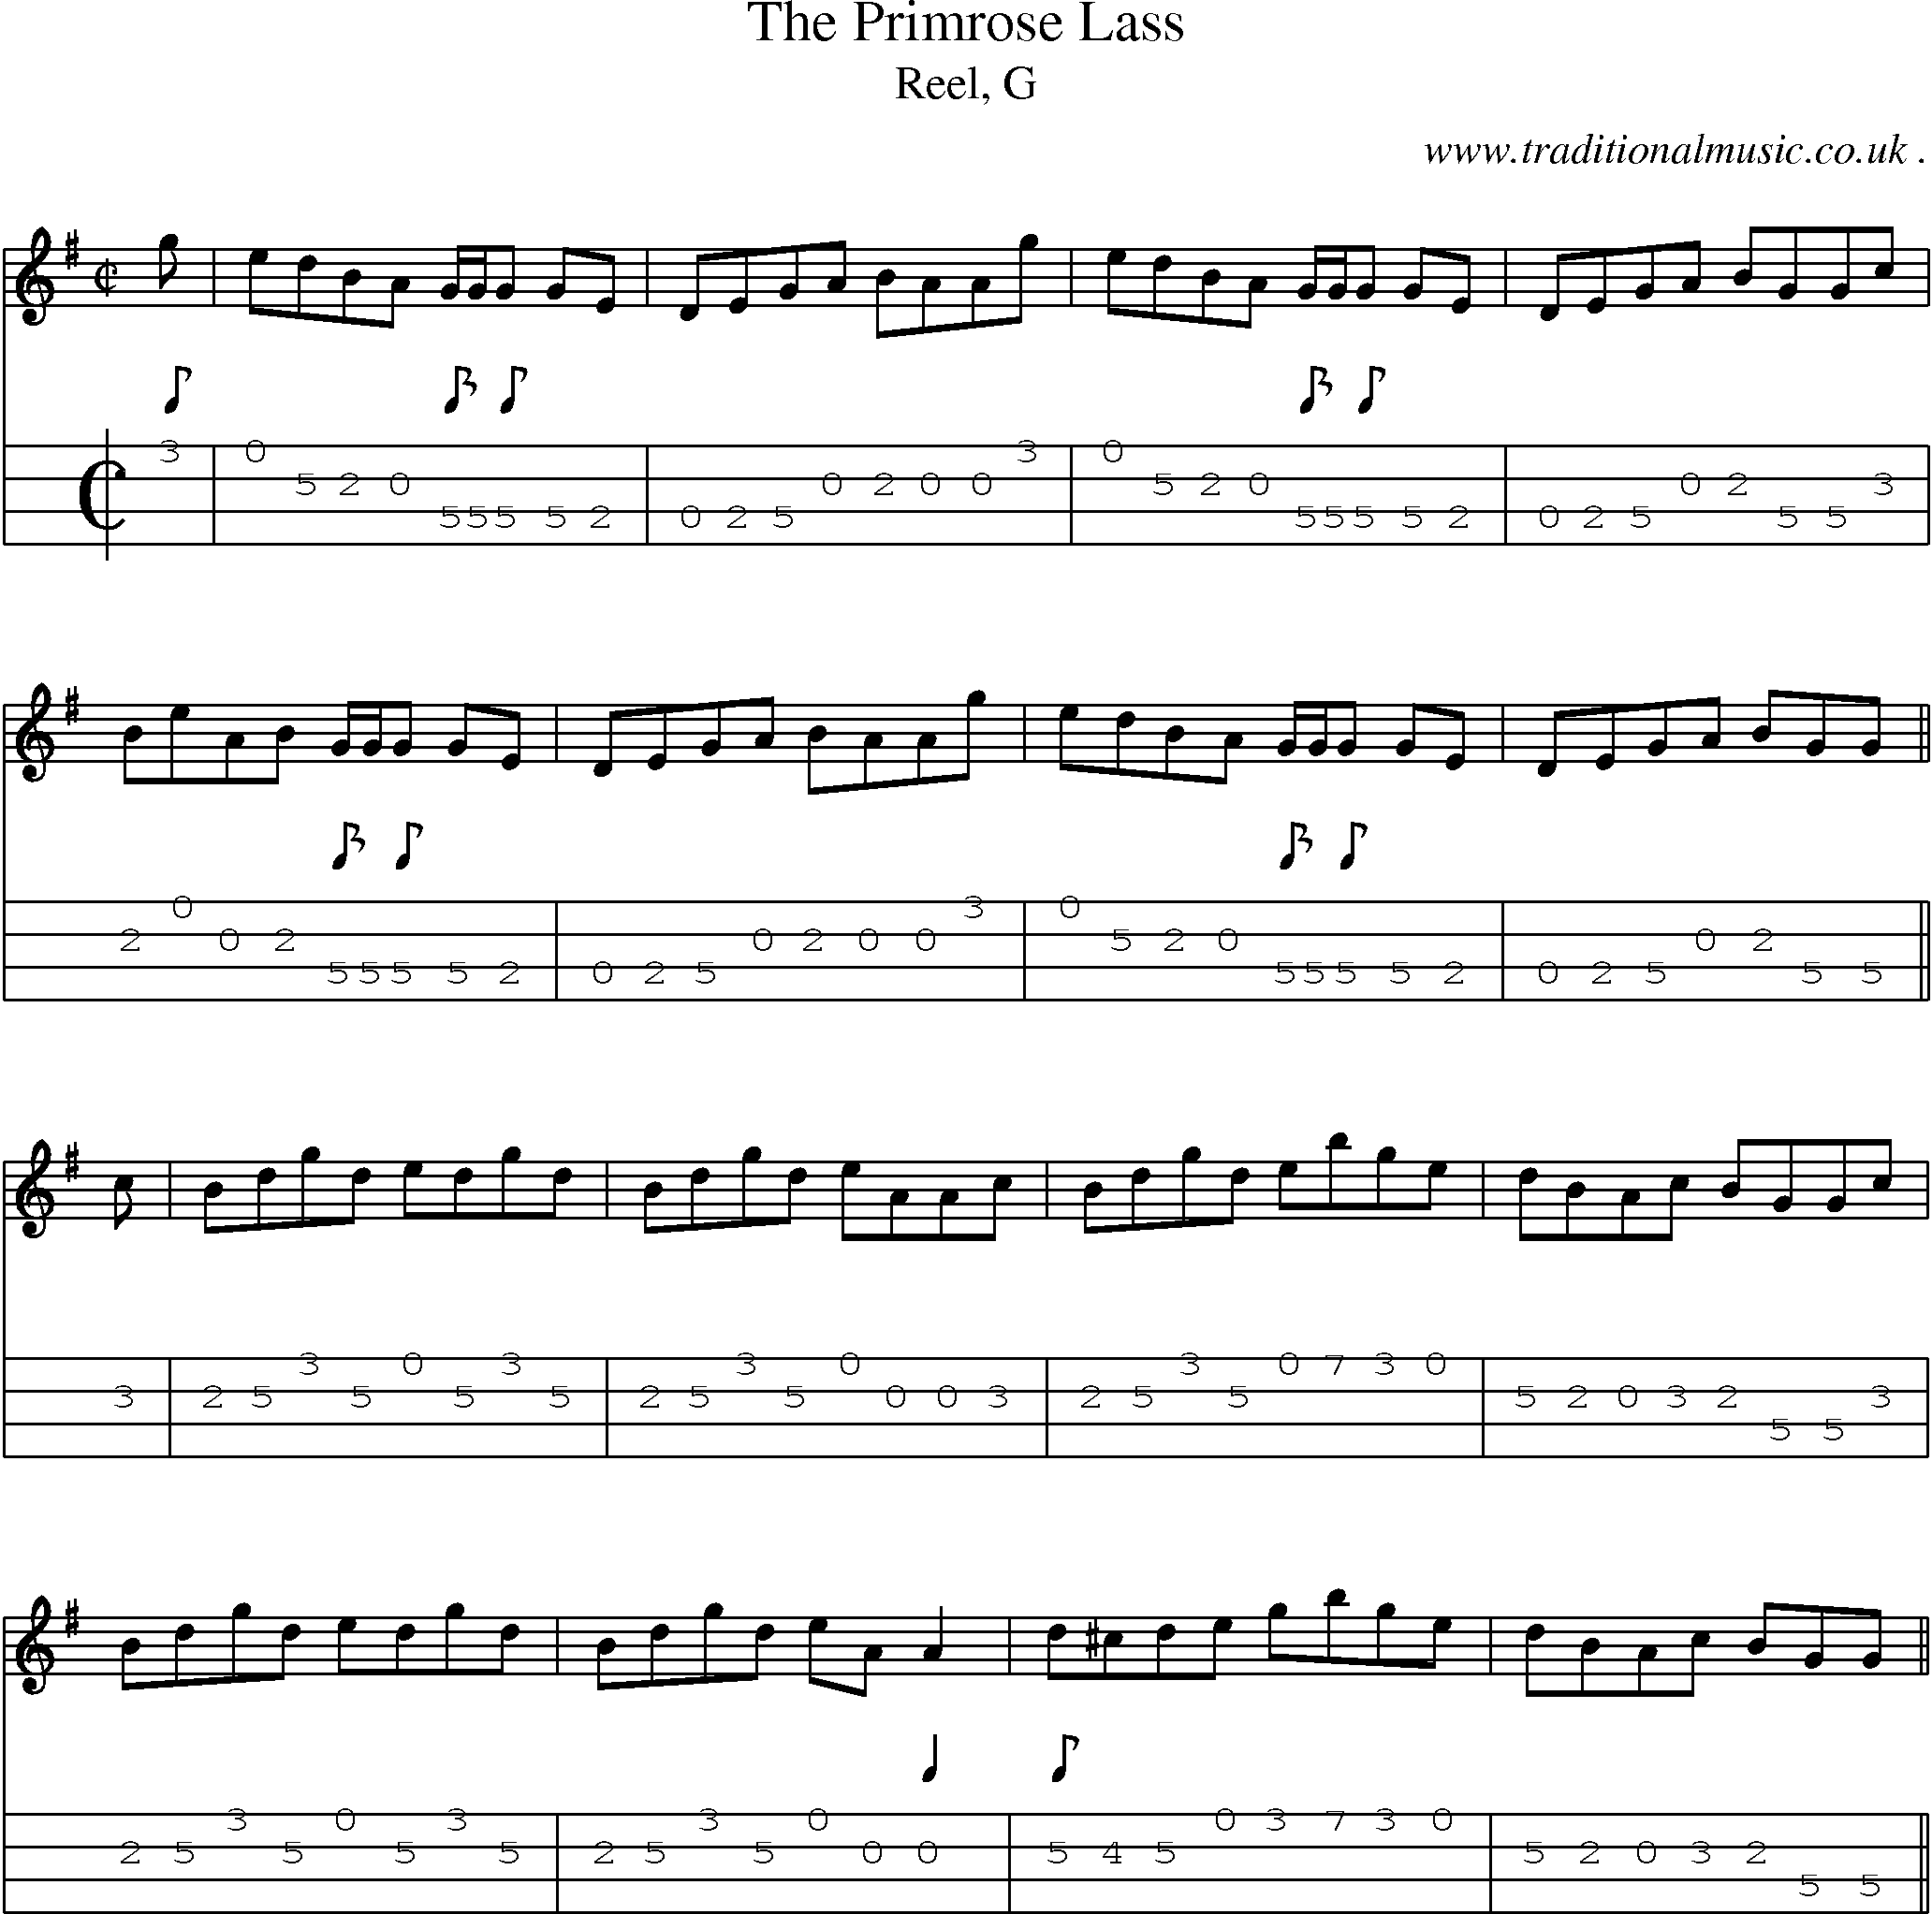 Sheet-music  score, Chords and Mandolin Tabs for The Primrose Lass